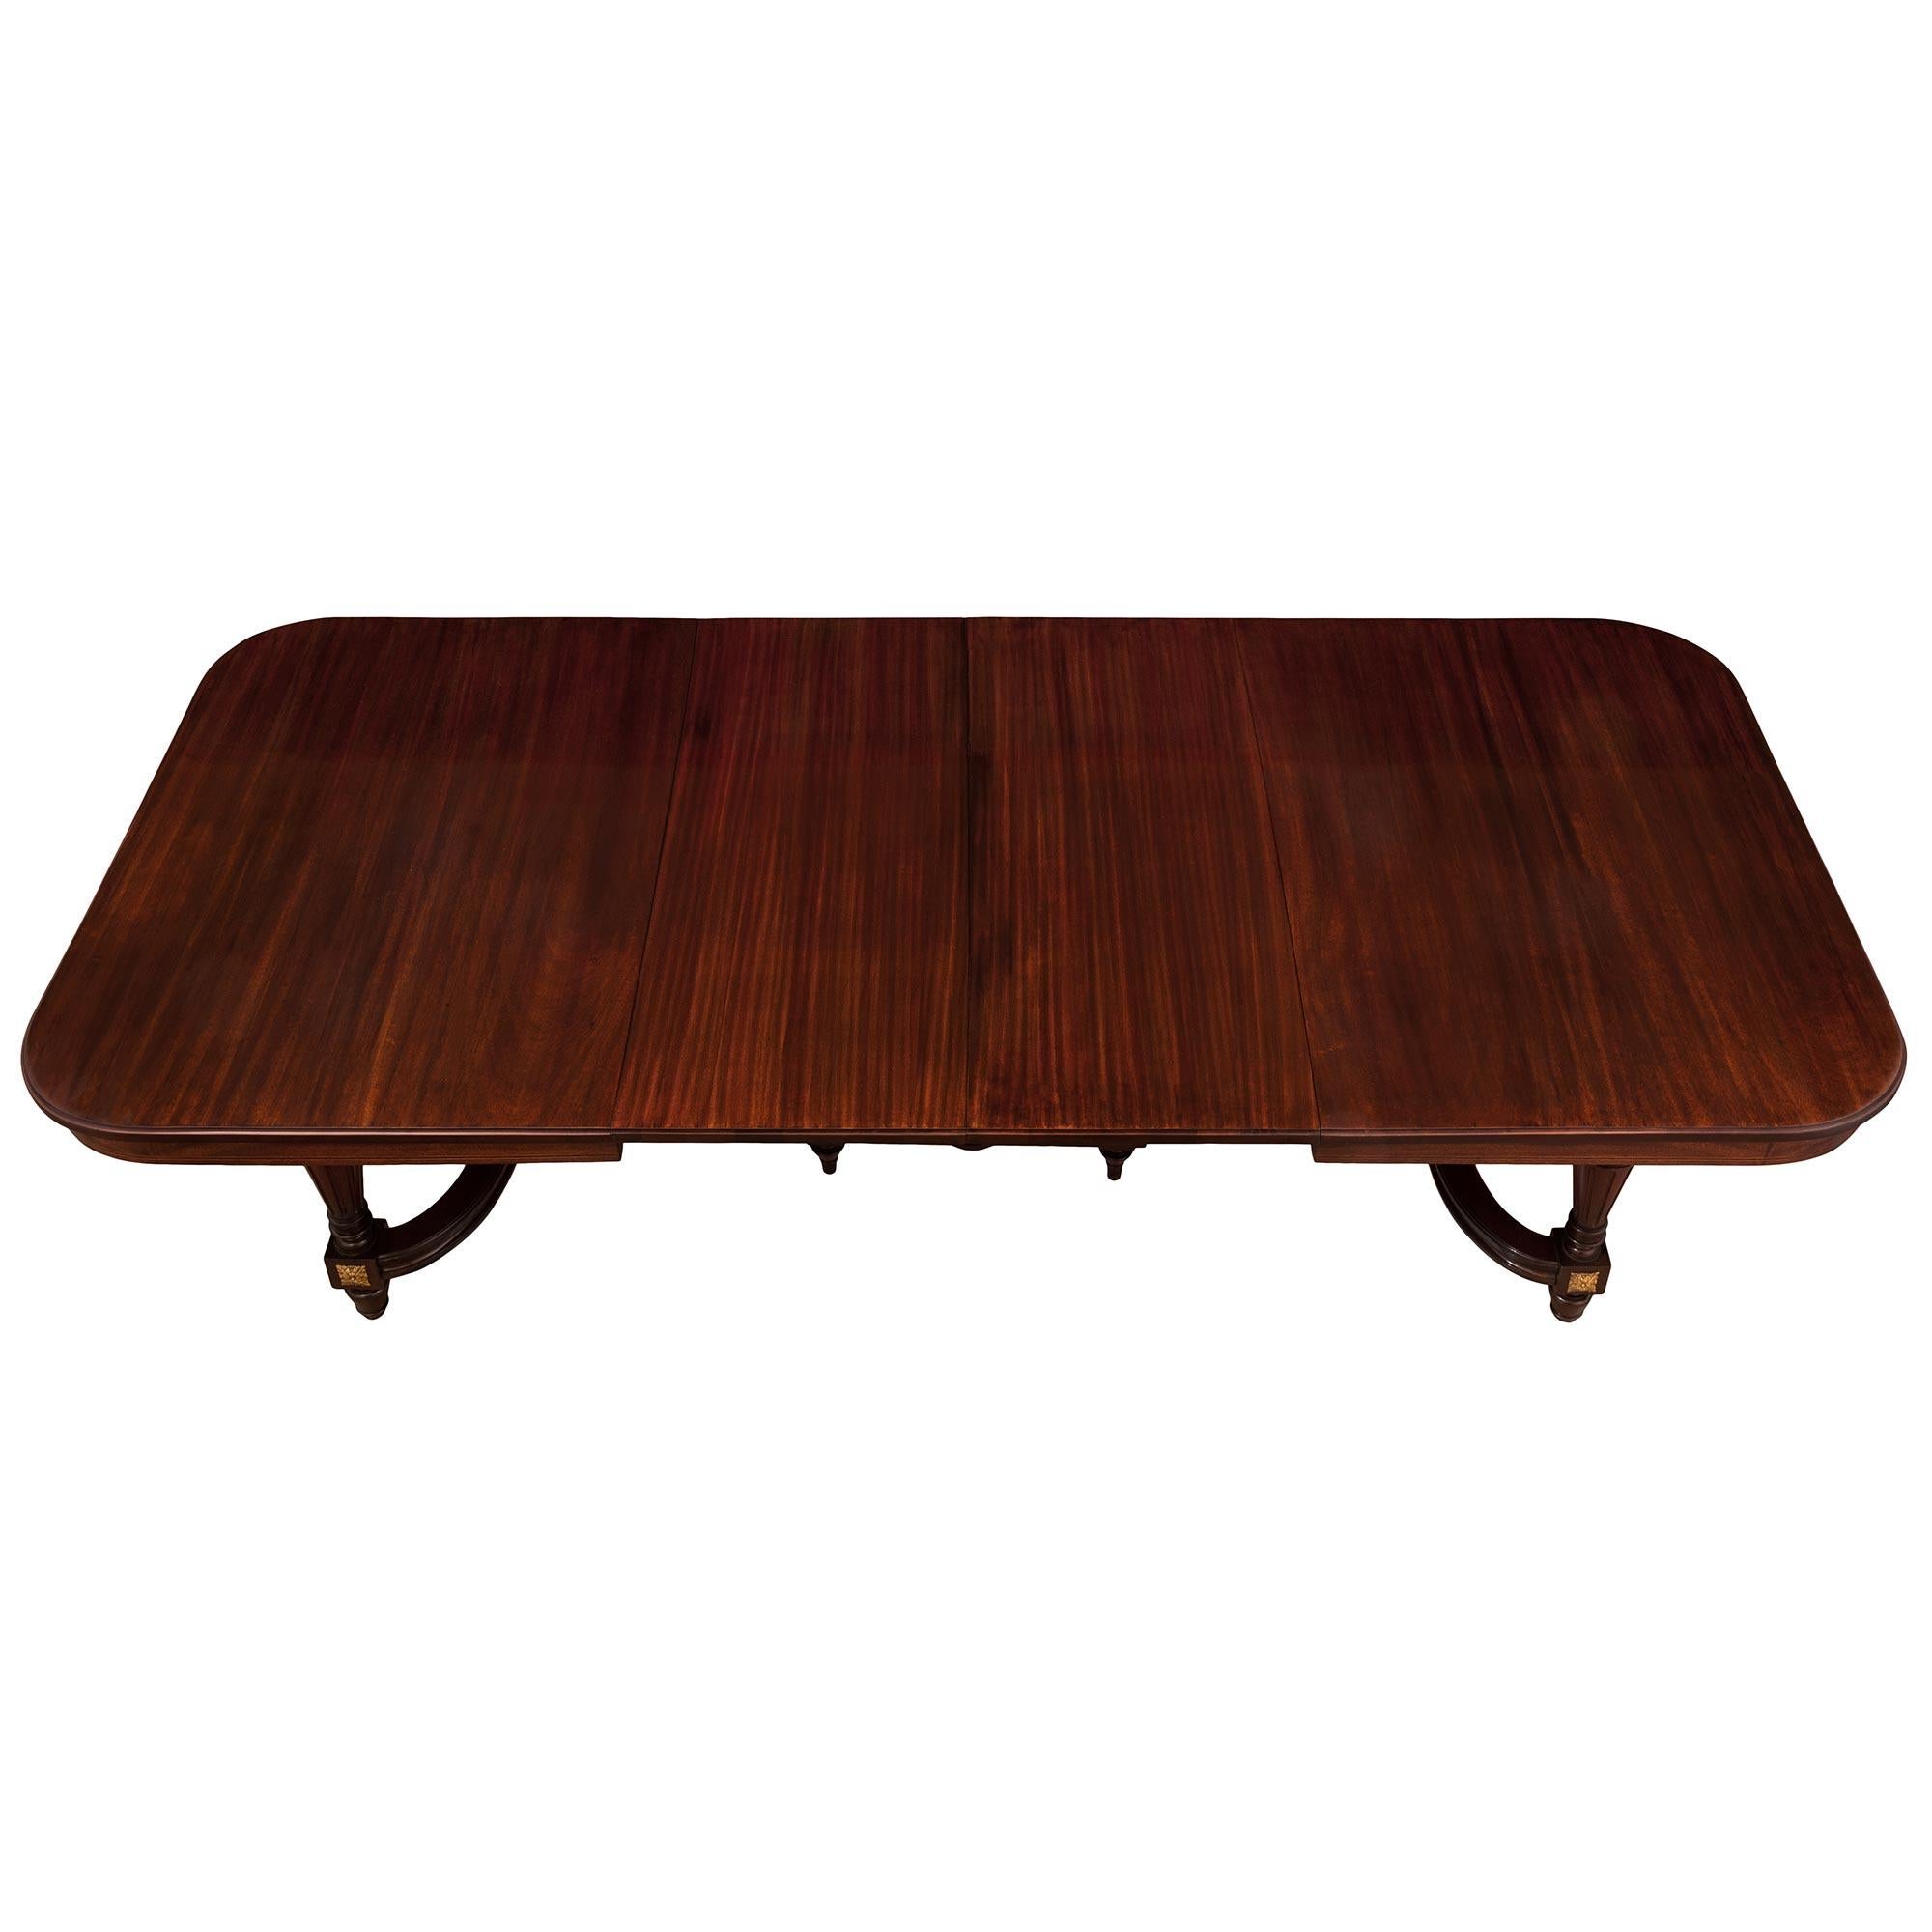 French 19th Century Louis XVI Style Mahogany Dining Table with Two Extensions For Sale 7